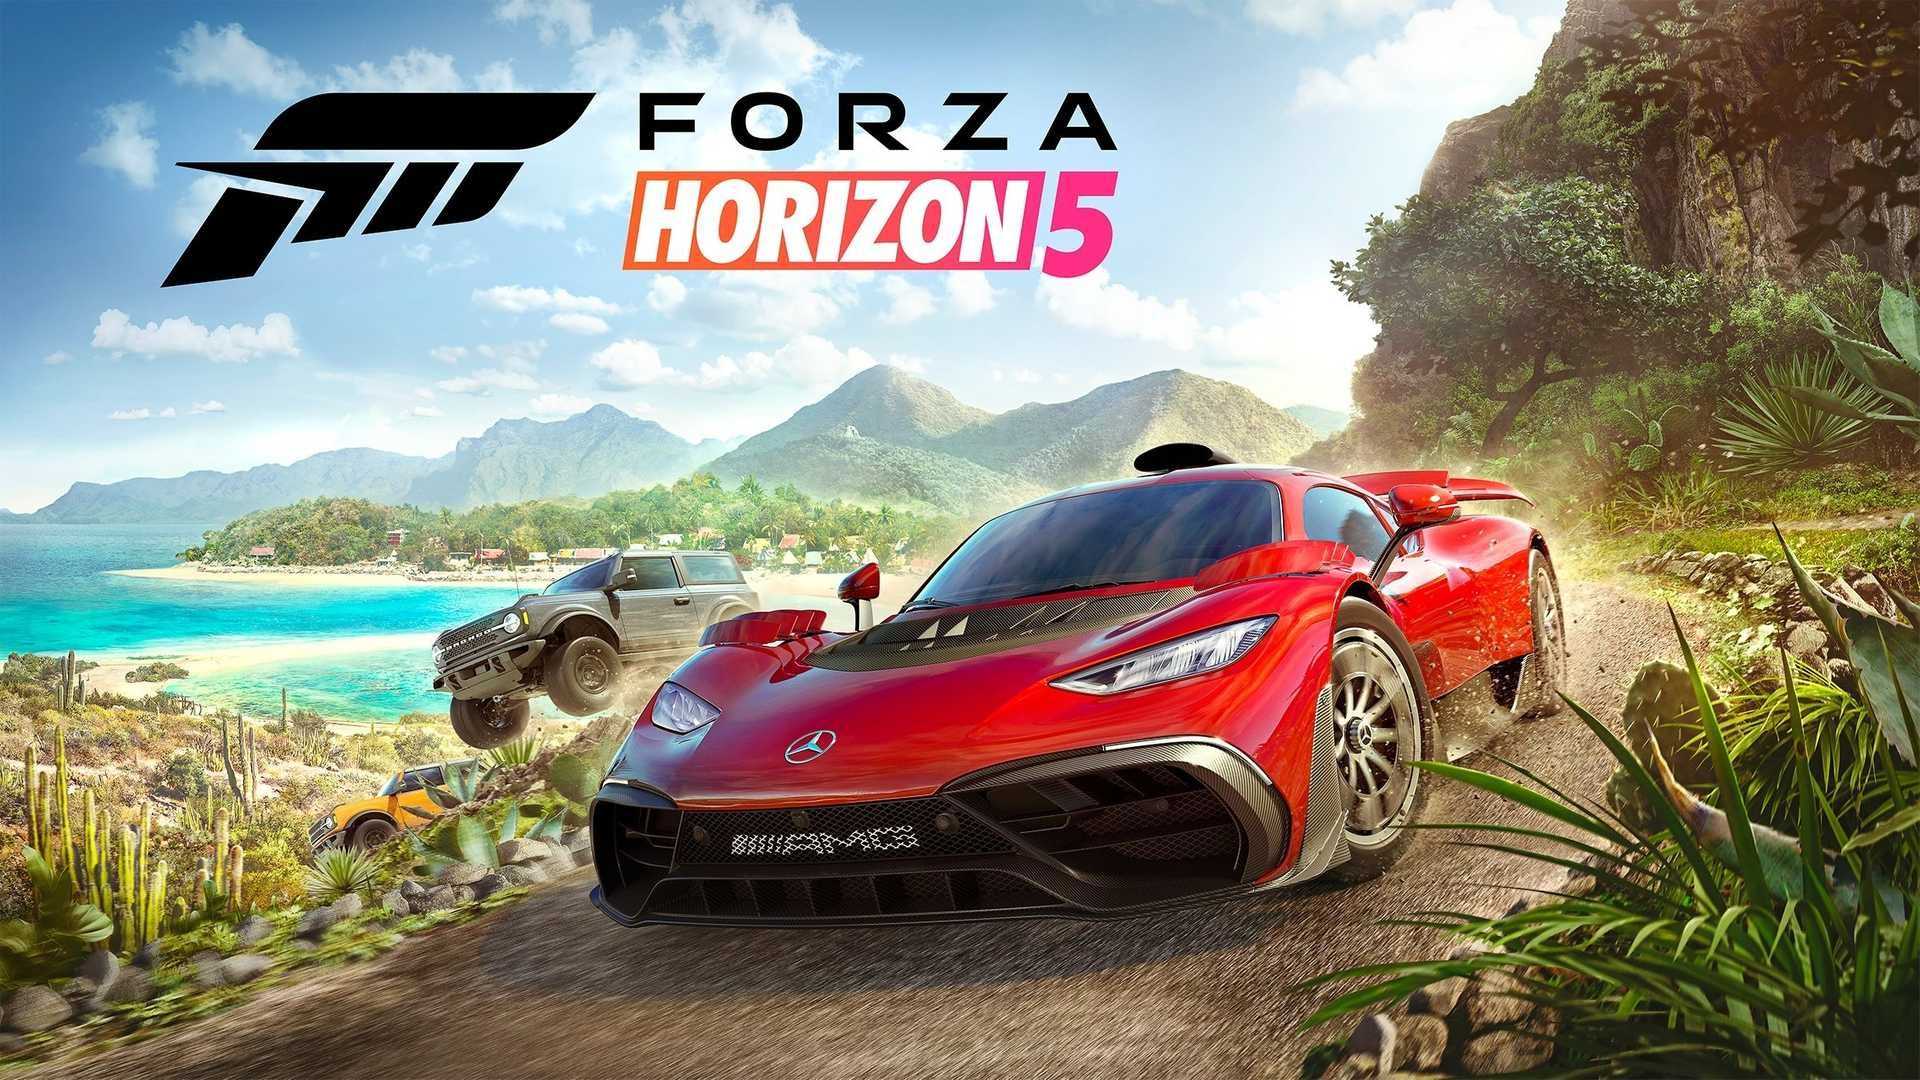 Forza Horizon 5 update brings PVP progression system and special races.